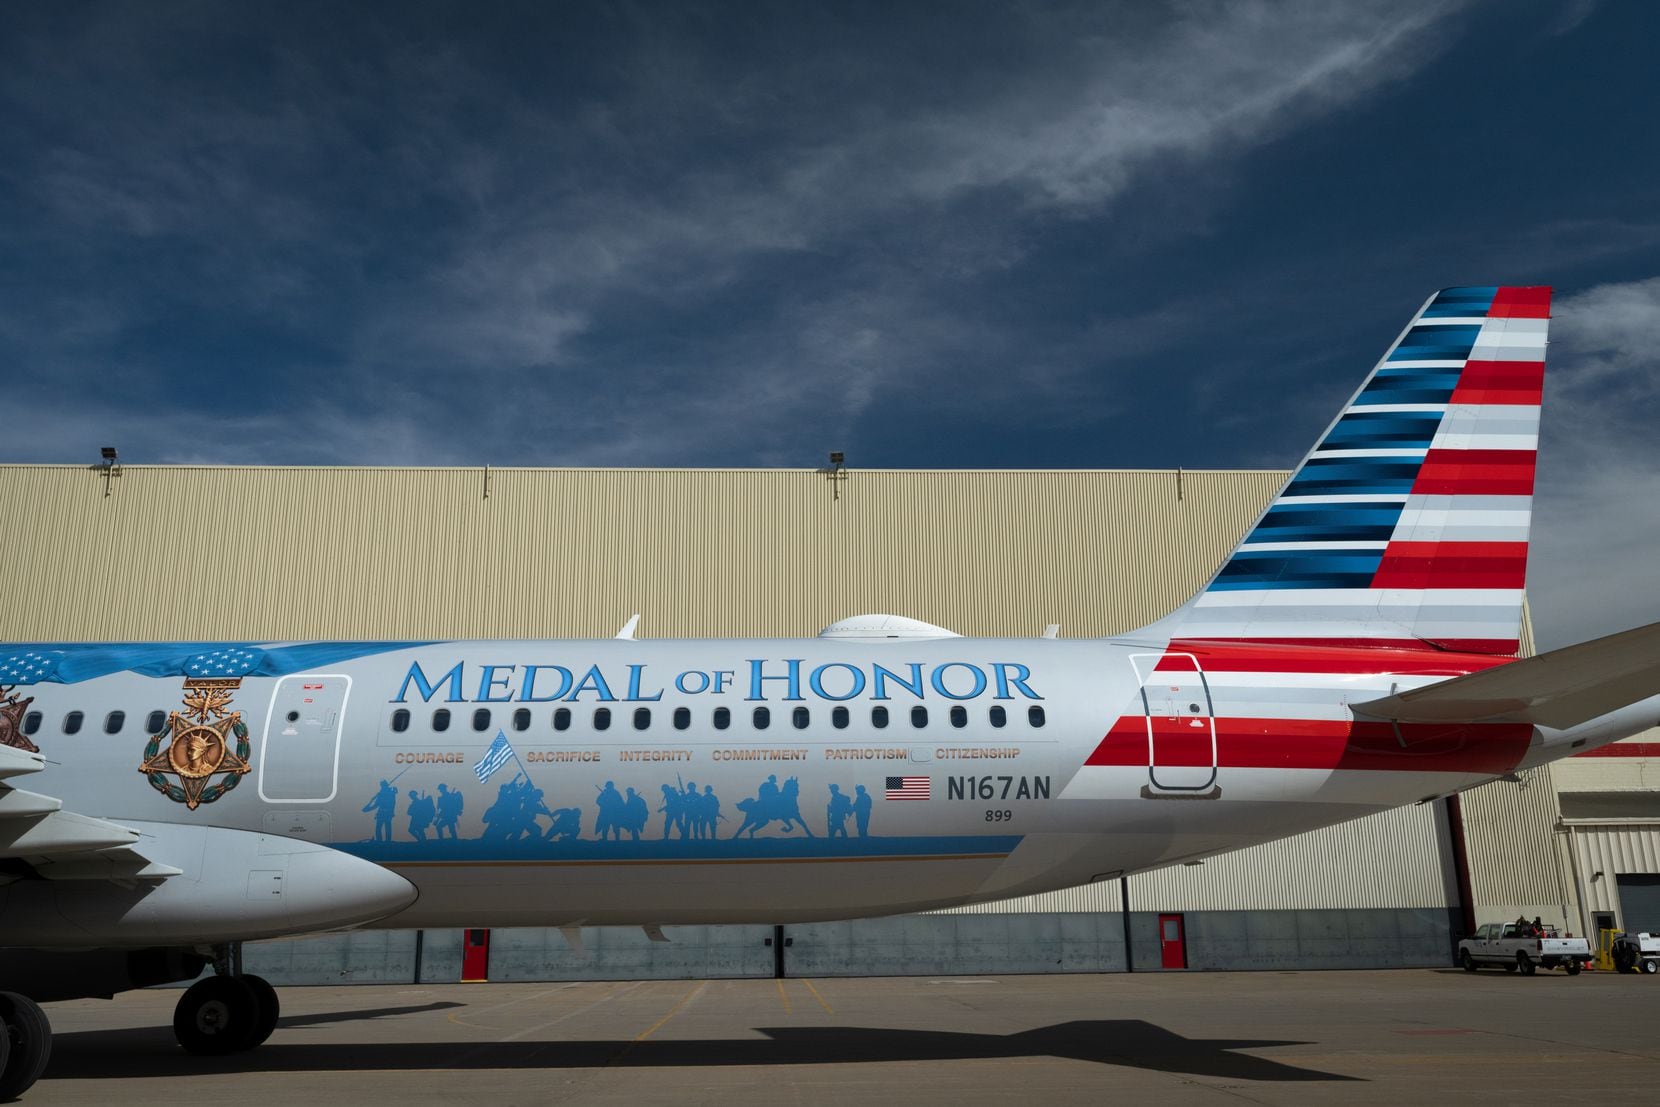 American Airlines' Flagship Valor plane was unveiled Thursday.